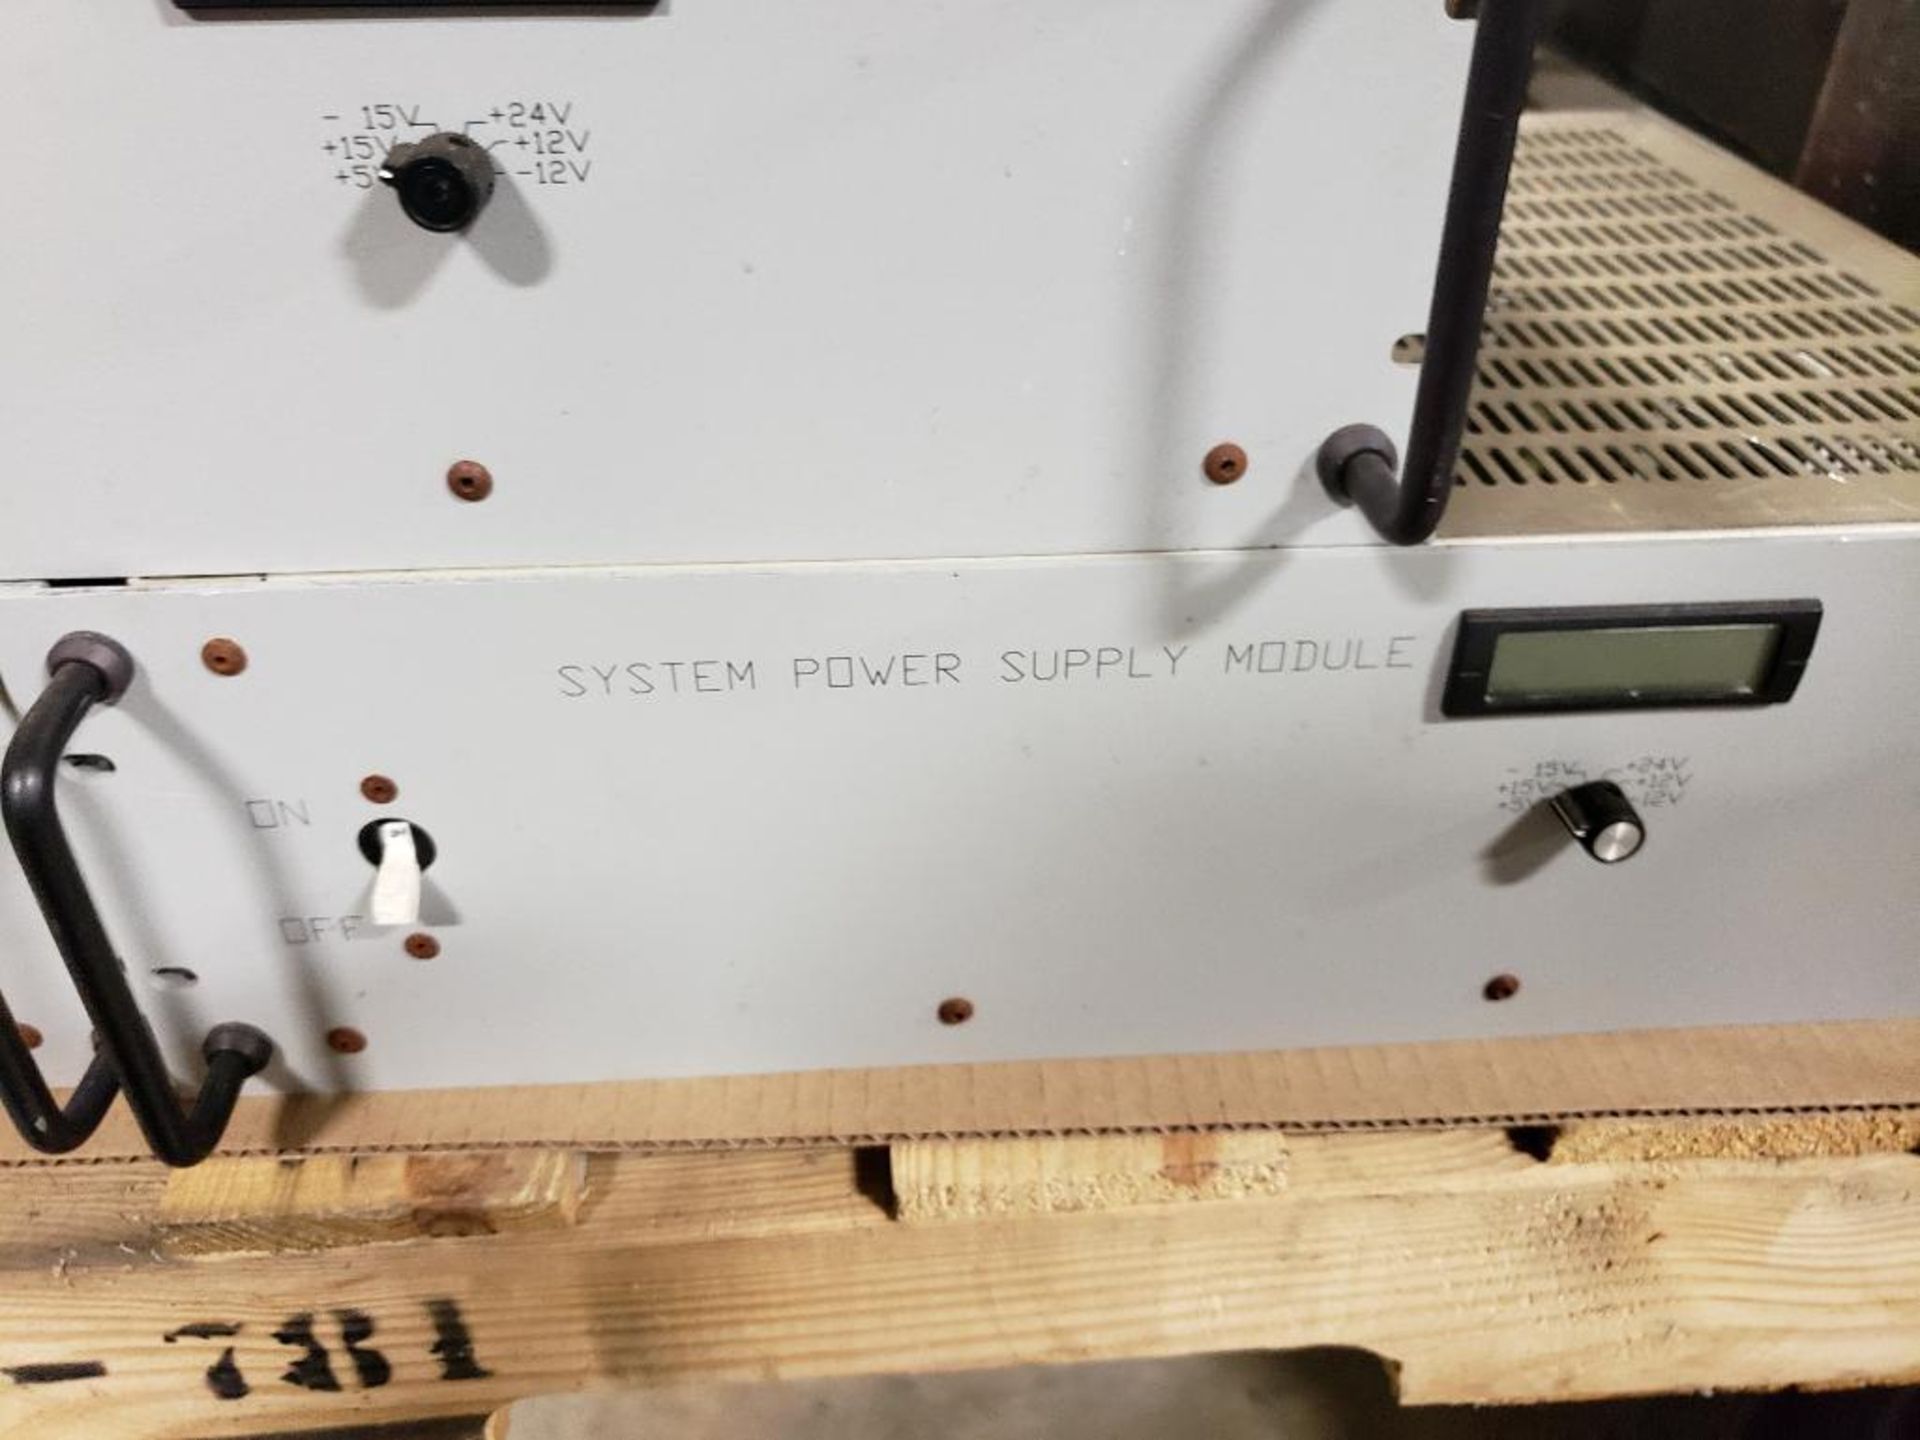 Qty 3 - System Power supply modules. - Image 5 of 7